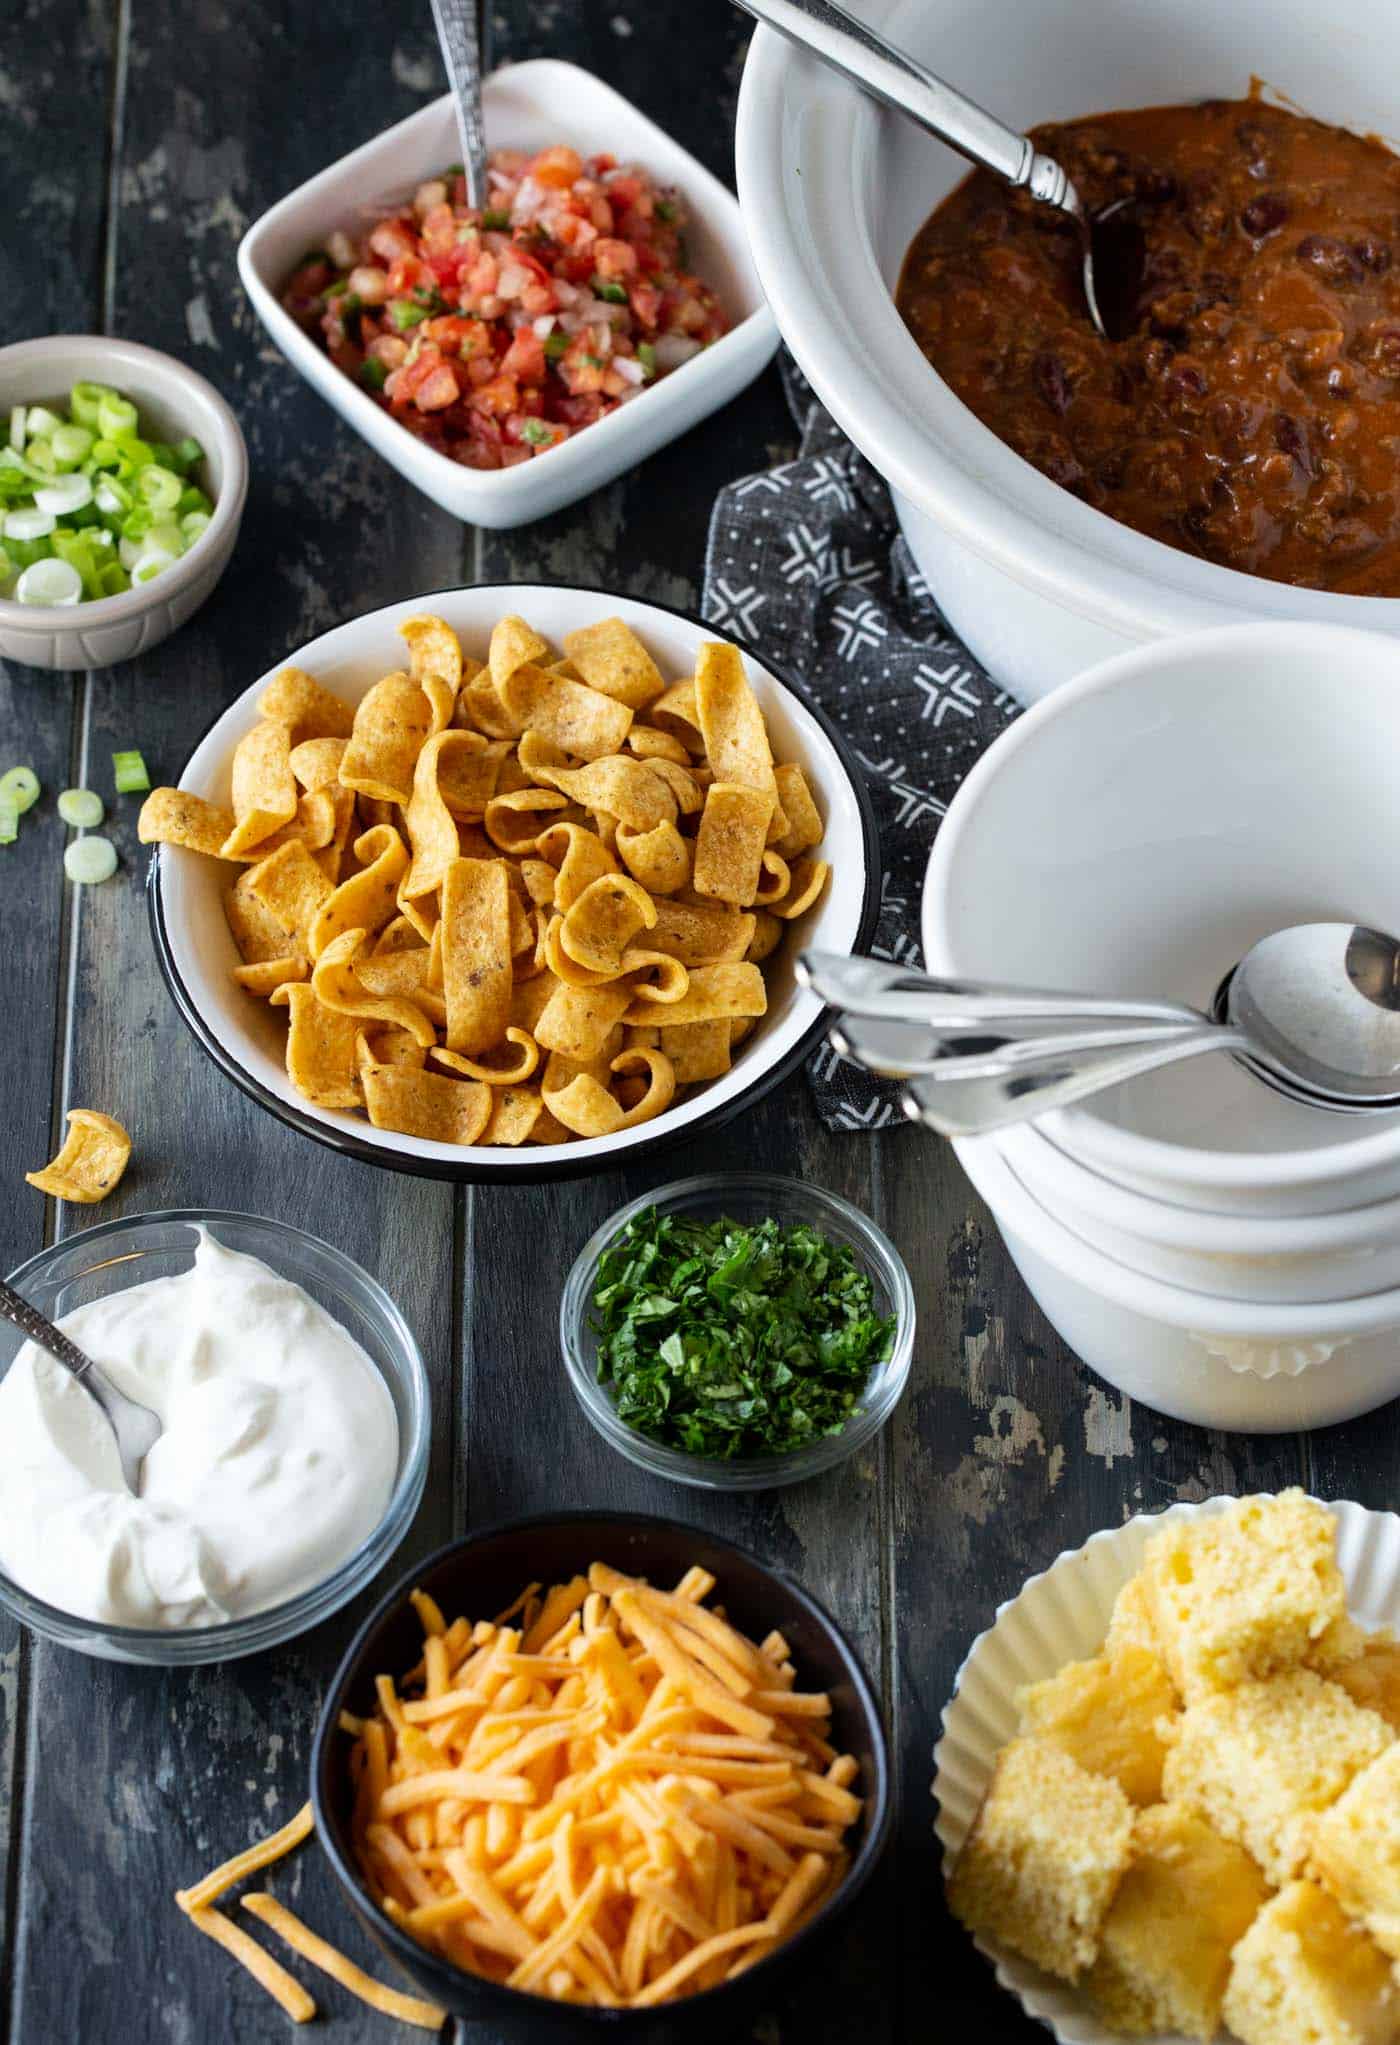 Slow cooker filled with chili. Surrounded by white chili bowls, spoons and chili toppings, including corn bread, fritos, pico de gallo, green onions, cilantro and sour cream.